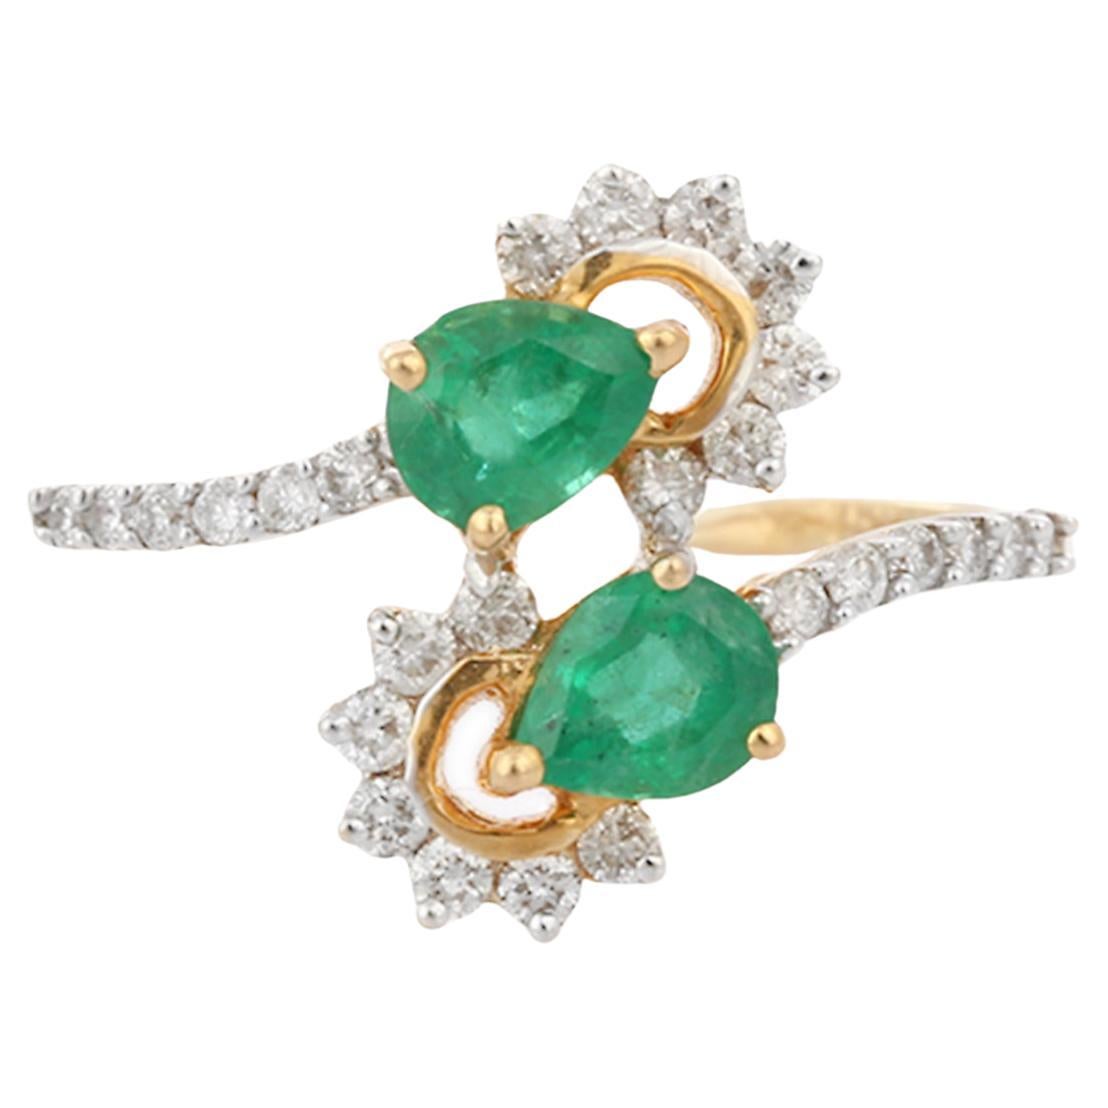 For Sale:  Exquisite Pear Cut Emerald and Diamond Open Ring in 18K Yellow Gold for Her